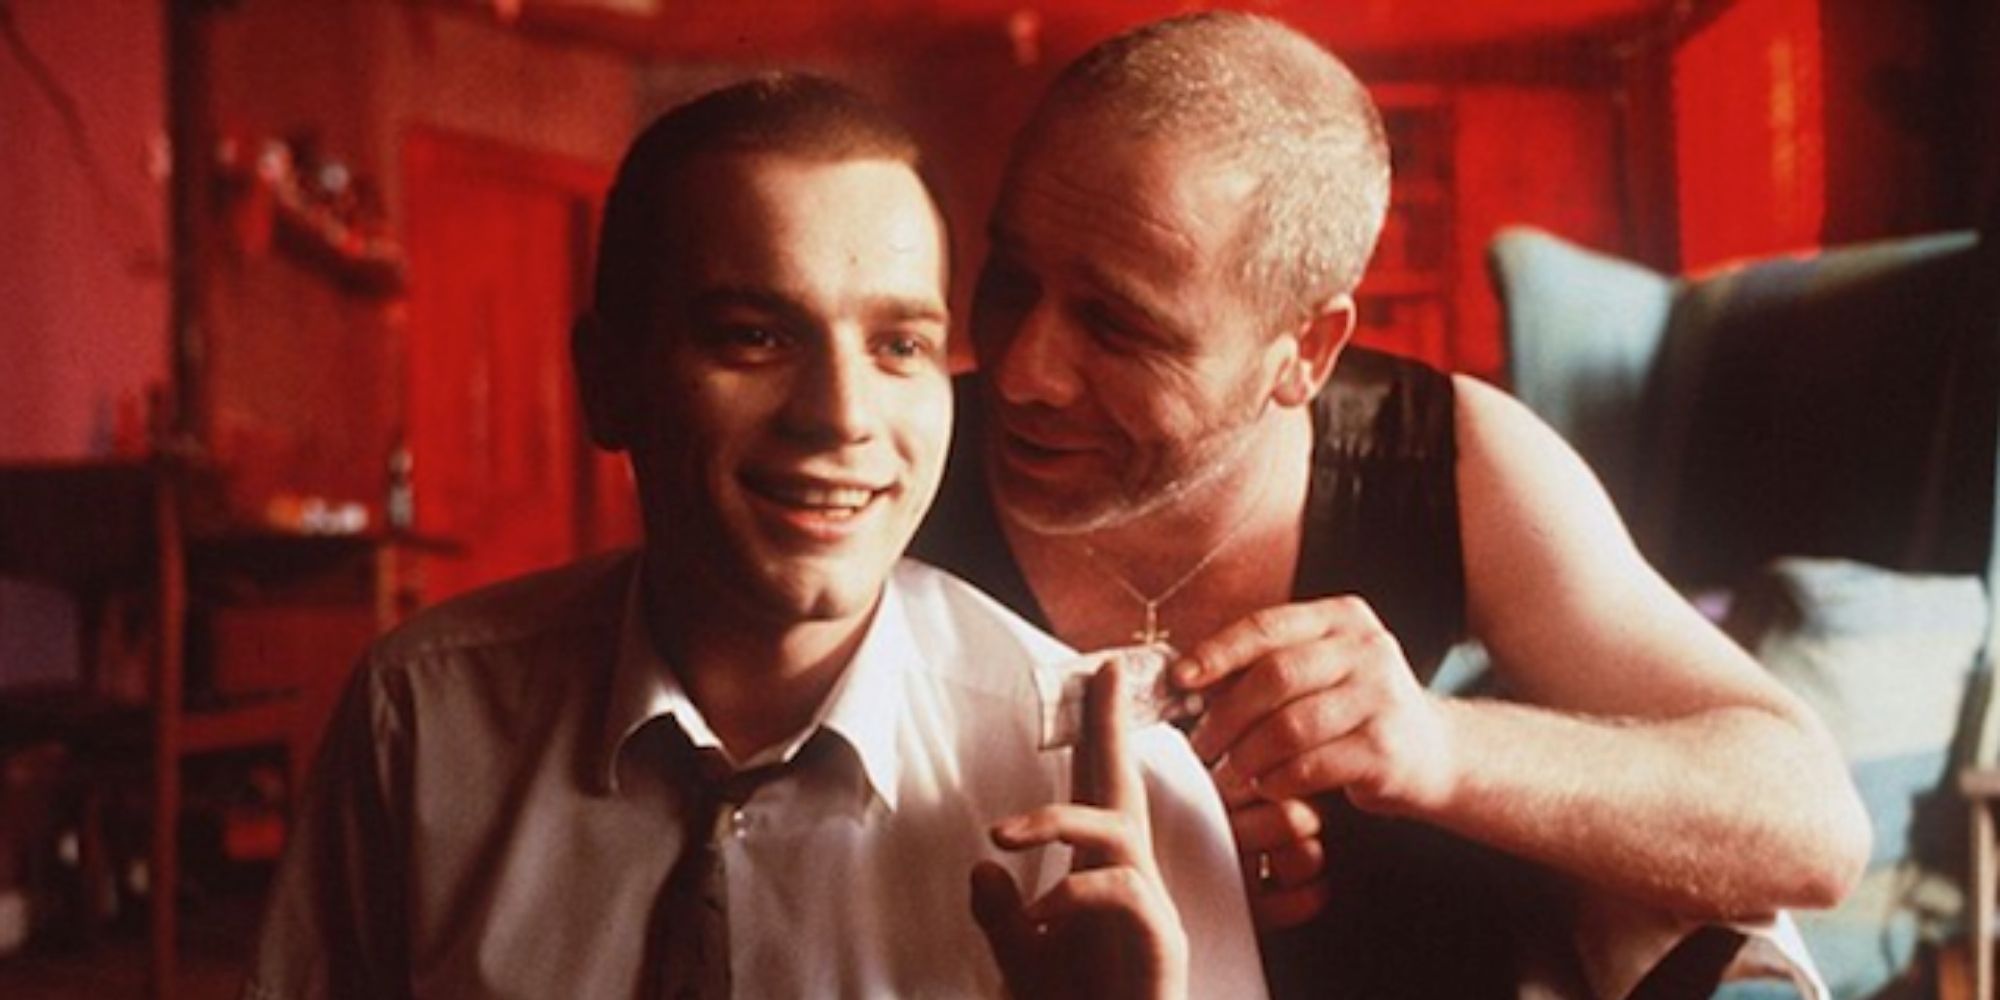 Mother Superior talks in Mark's ear in Trainspotting